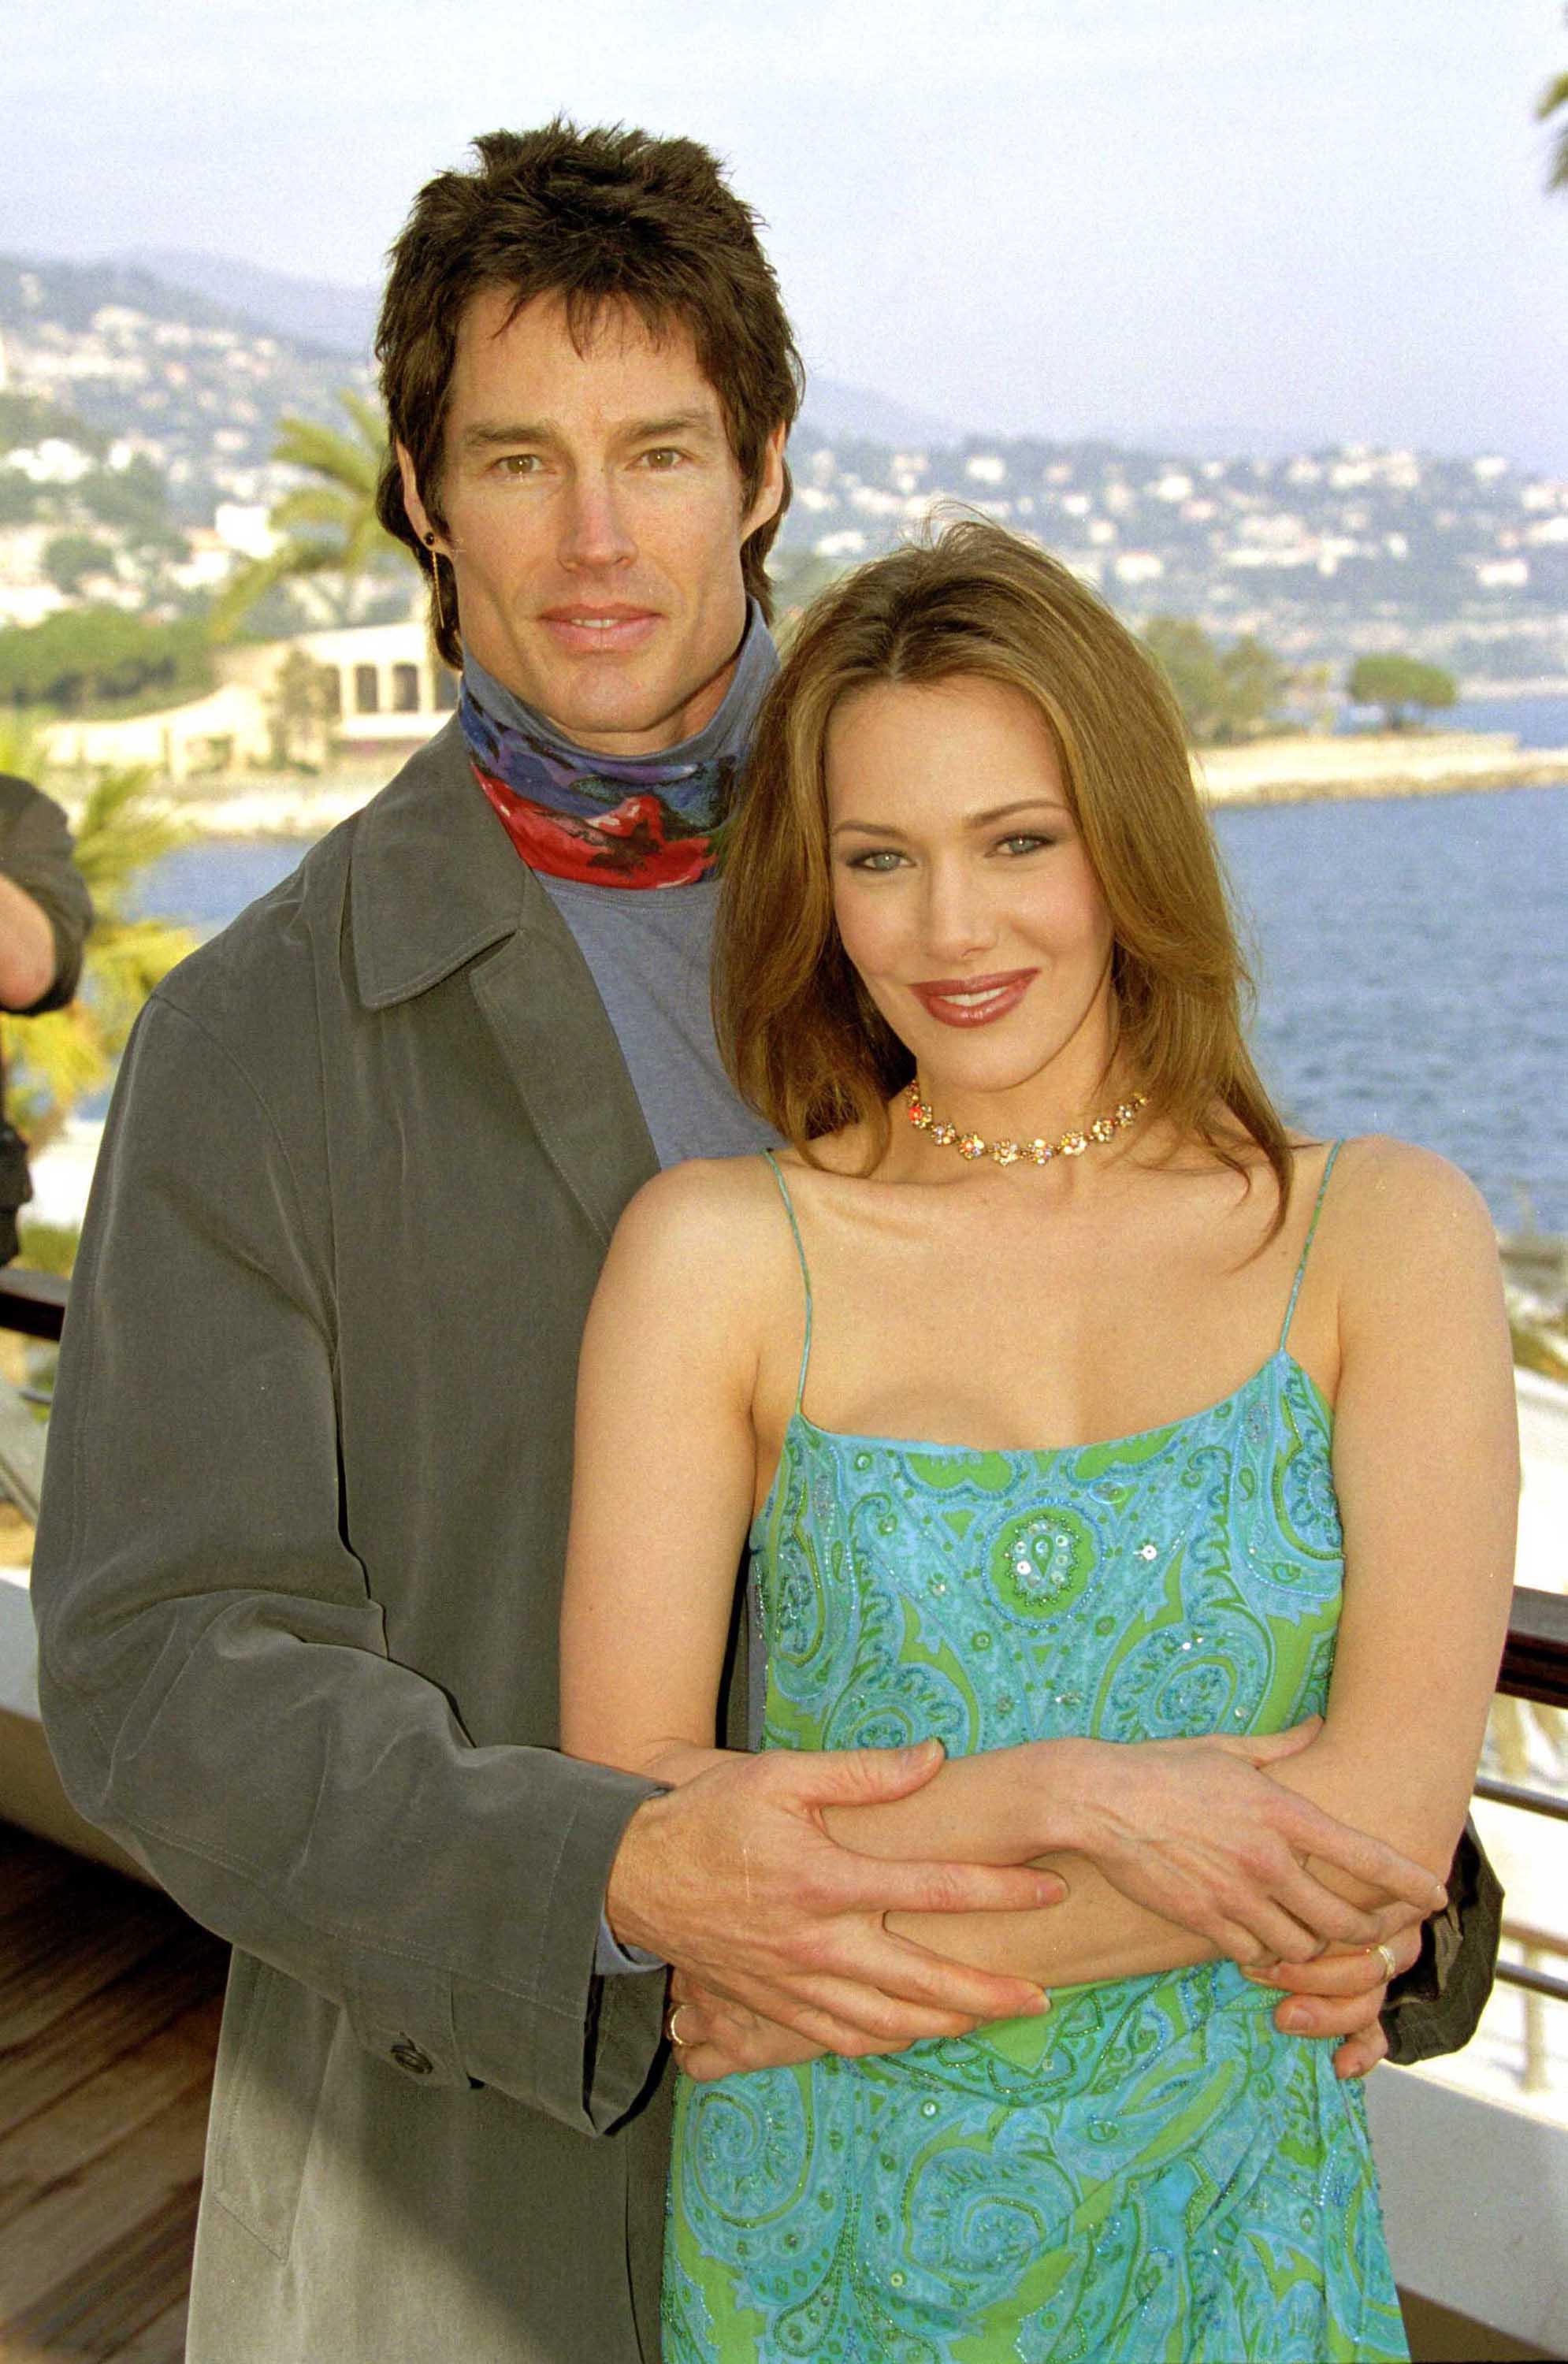 'The Bold and the Beautiful' actor Ronn Moss in a grey jacket and blue shirt, and Hunter Tylo in a blue dress, embrace for a photo.